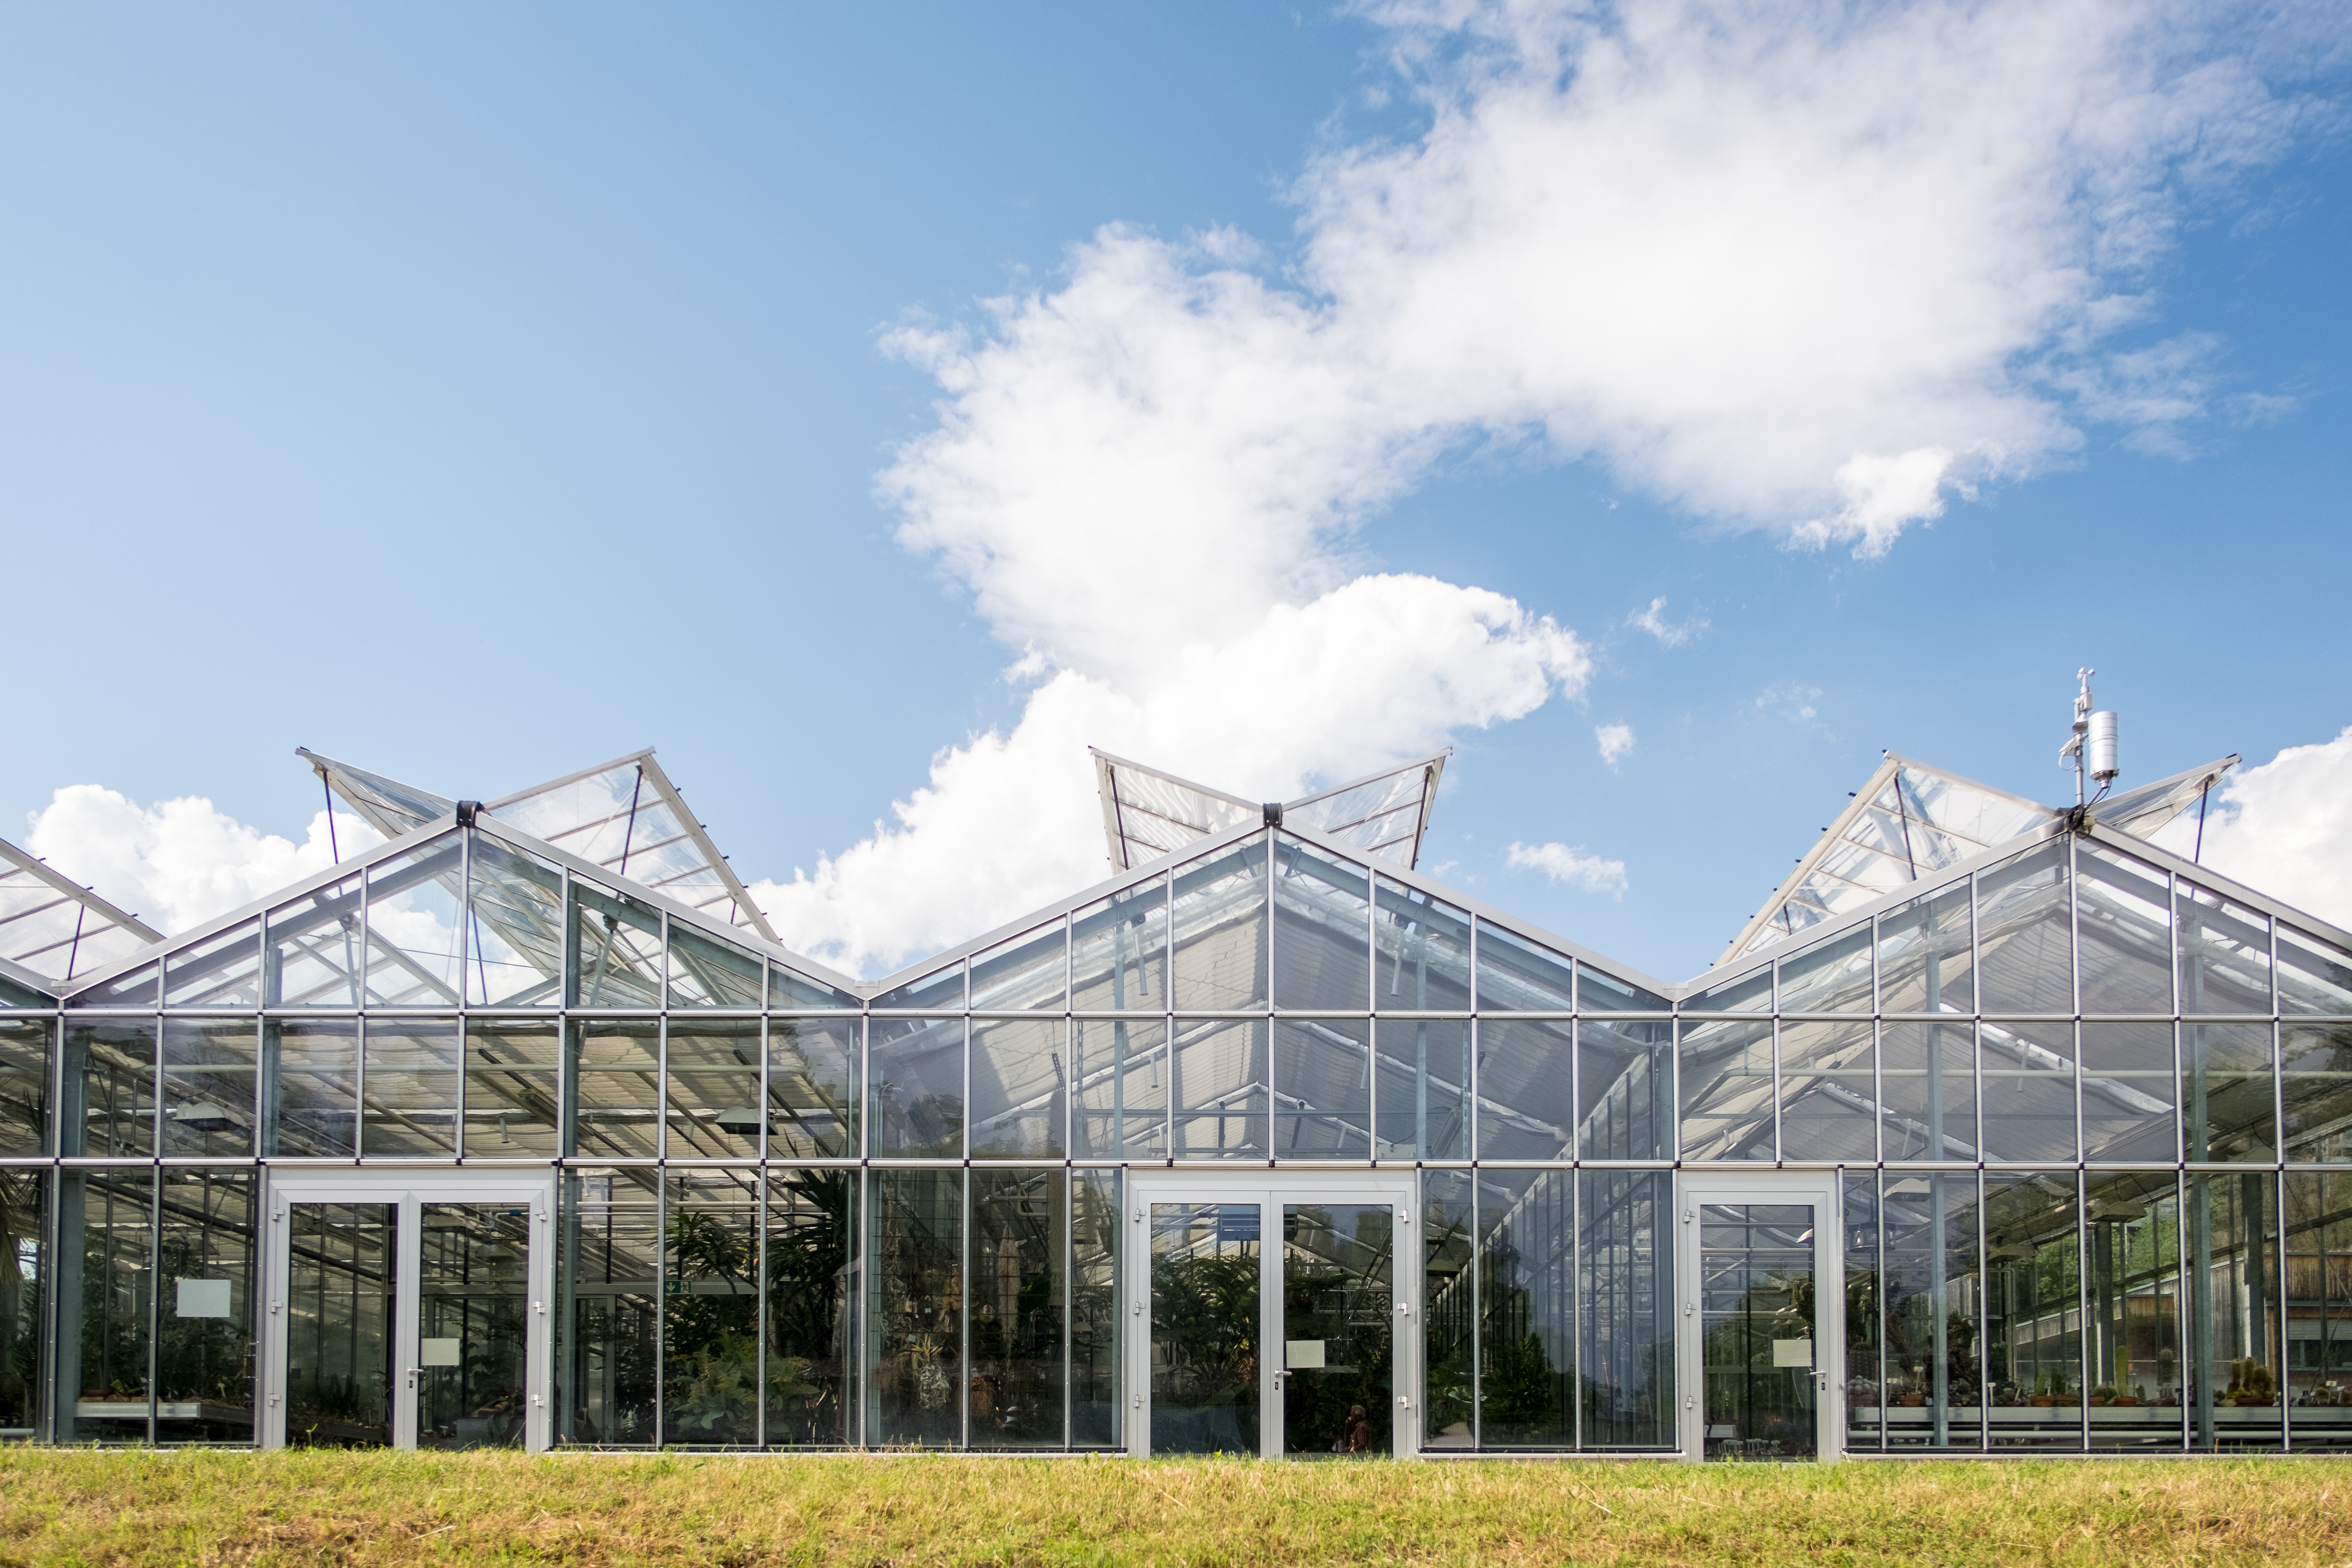 Three adjoining glass greenhouses with open roof panels.